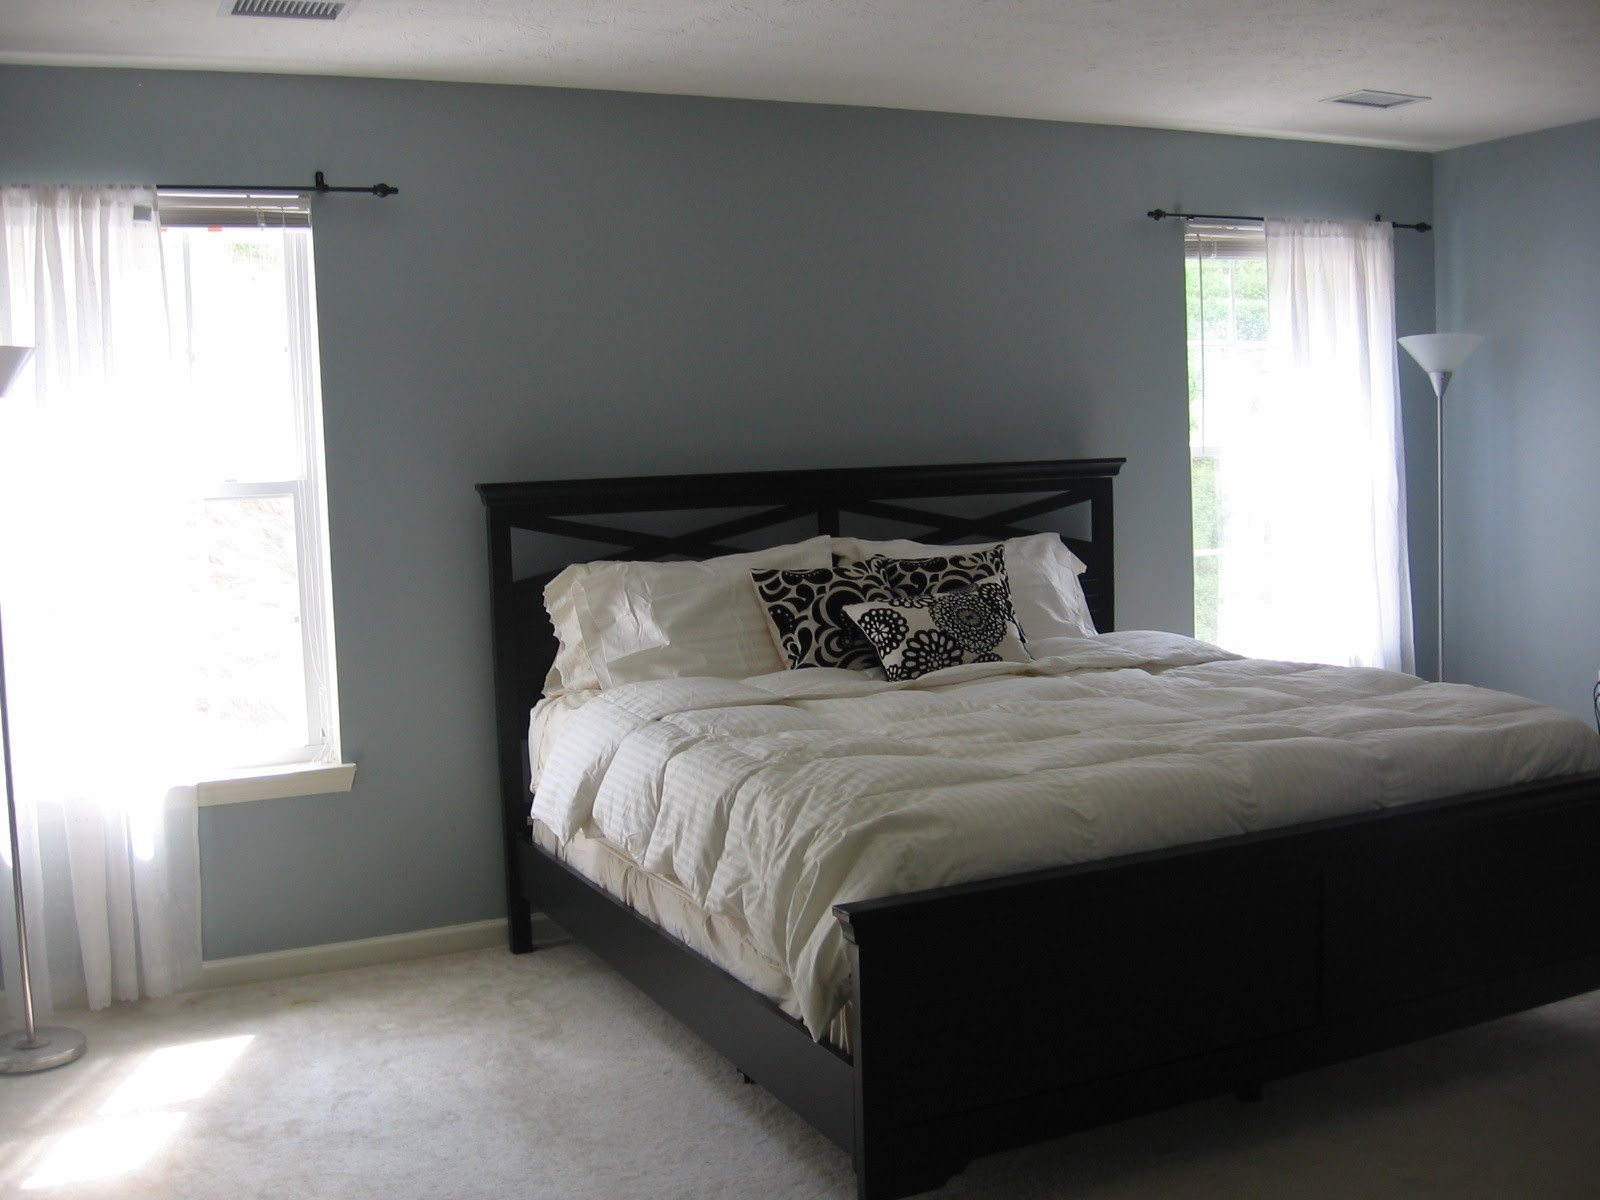 Bedroom Paint Color
 Elegant Gray Paint Colors for Bedrooms – HomesFeed